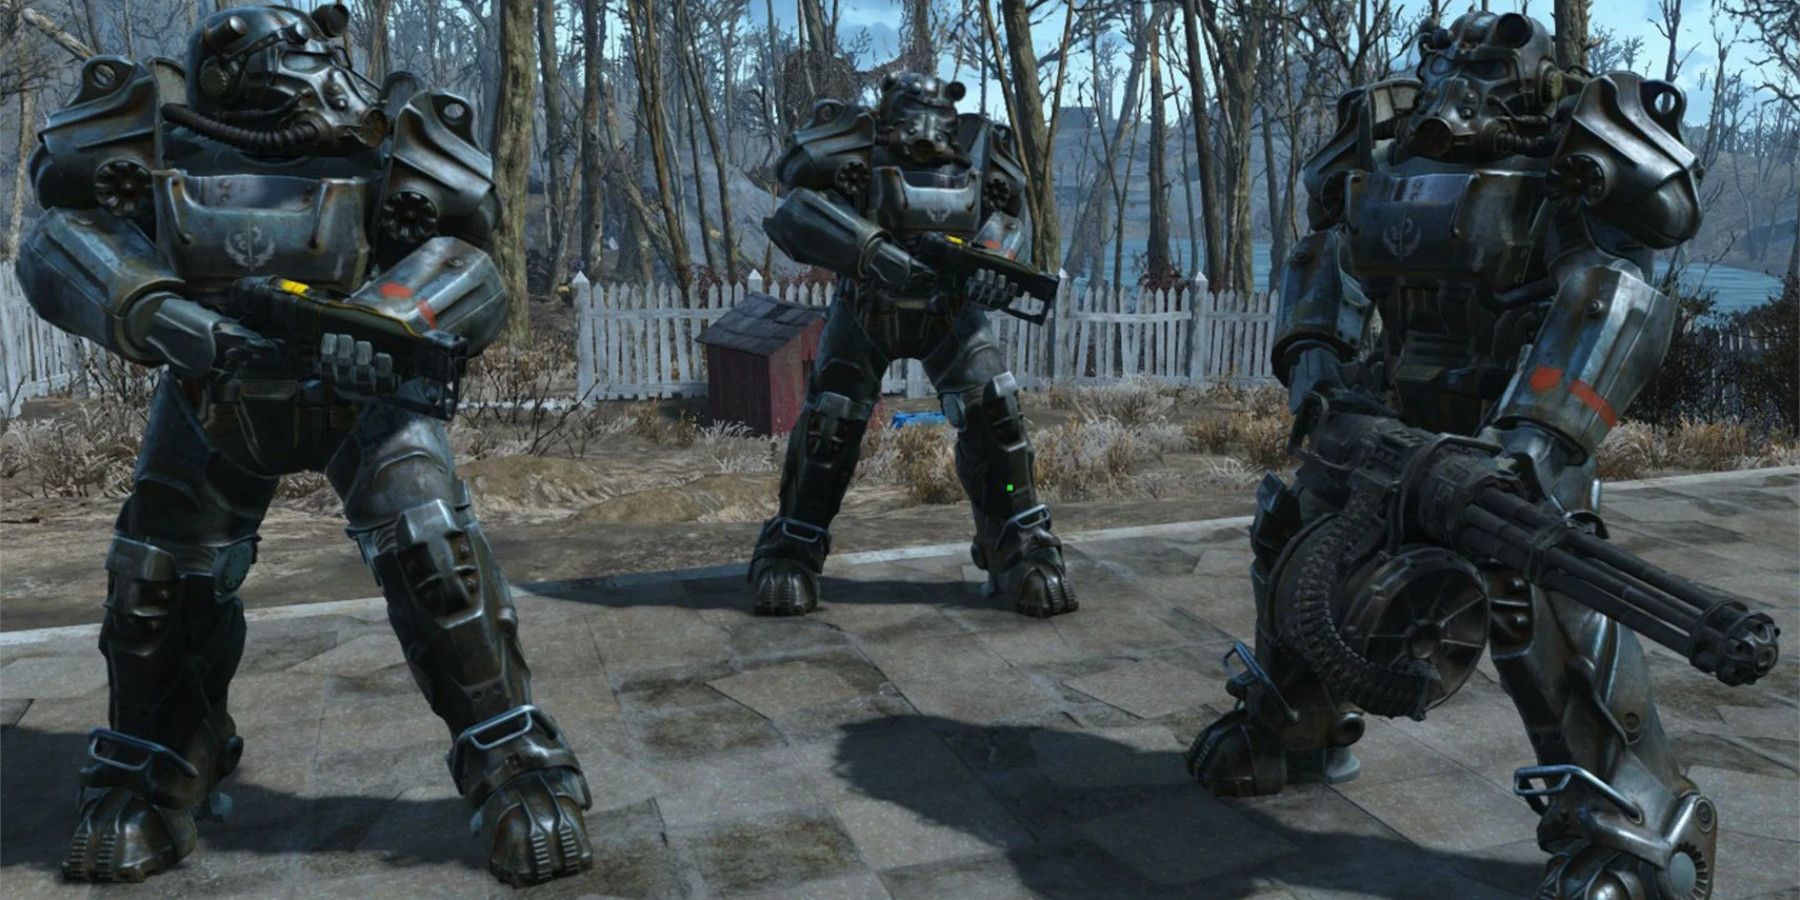 fallout-76-three-players-in-brotherhood-of-steel-power-armor